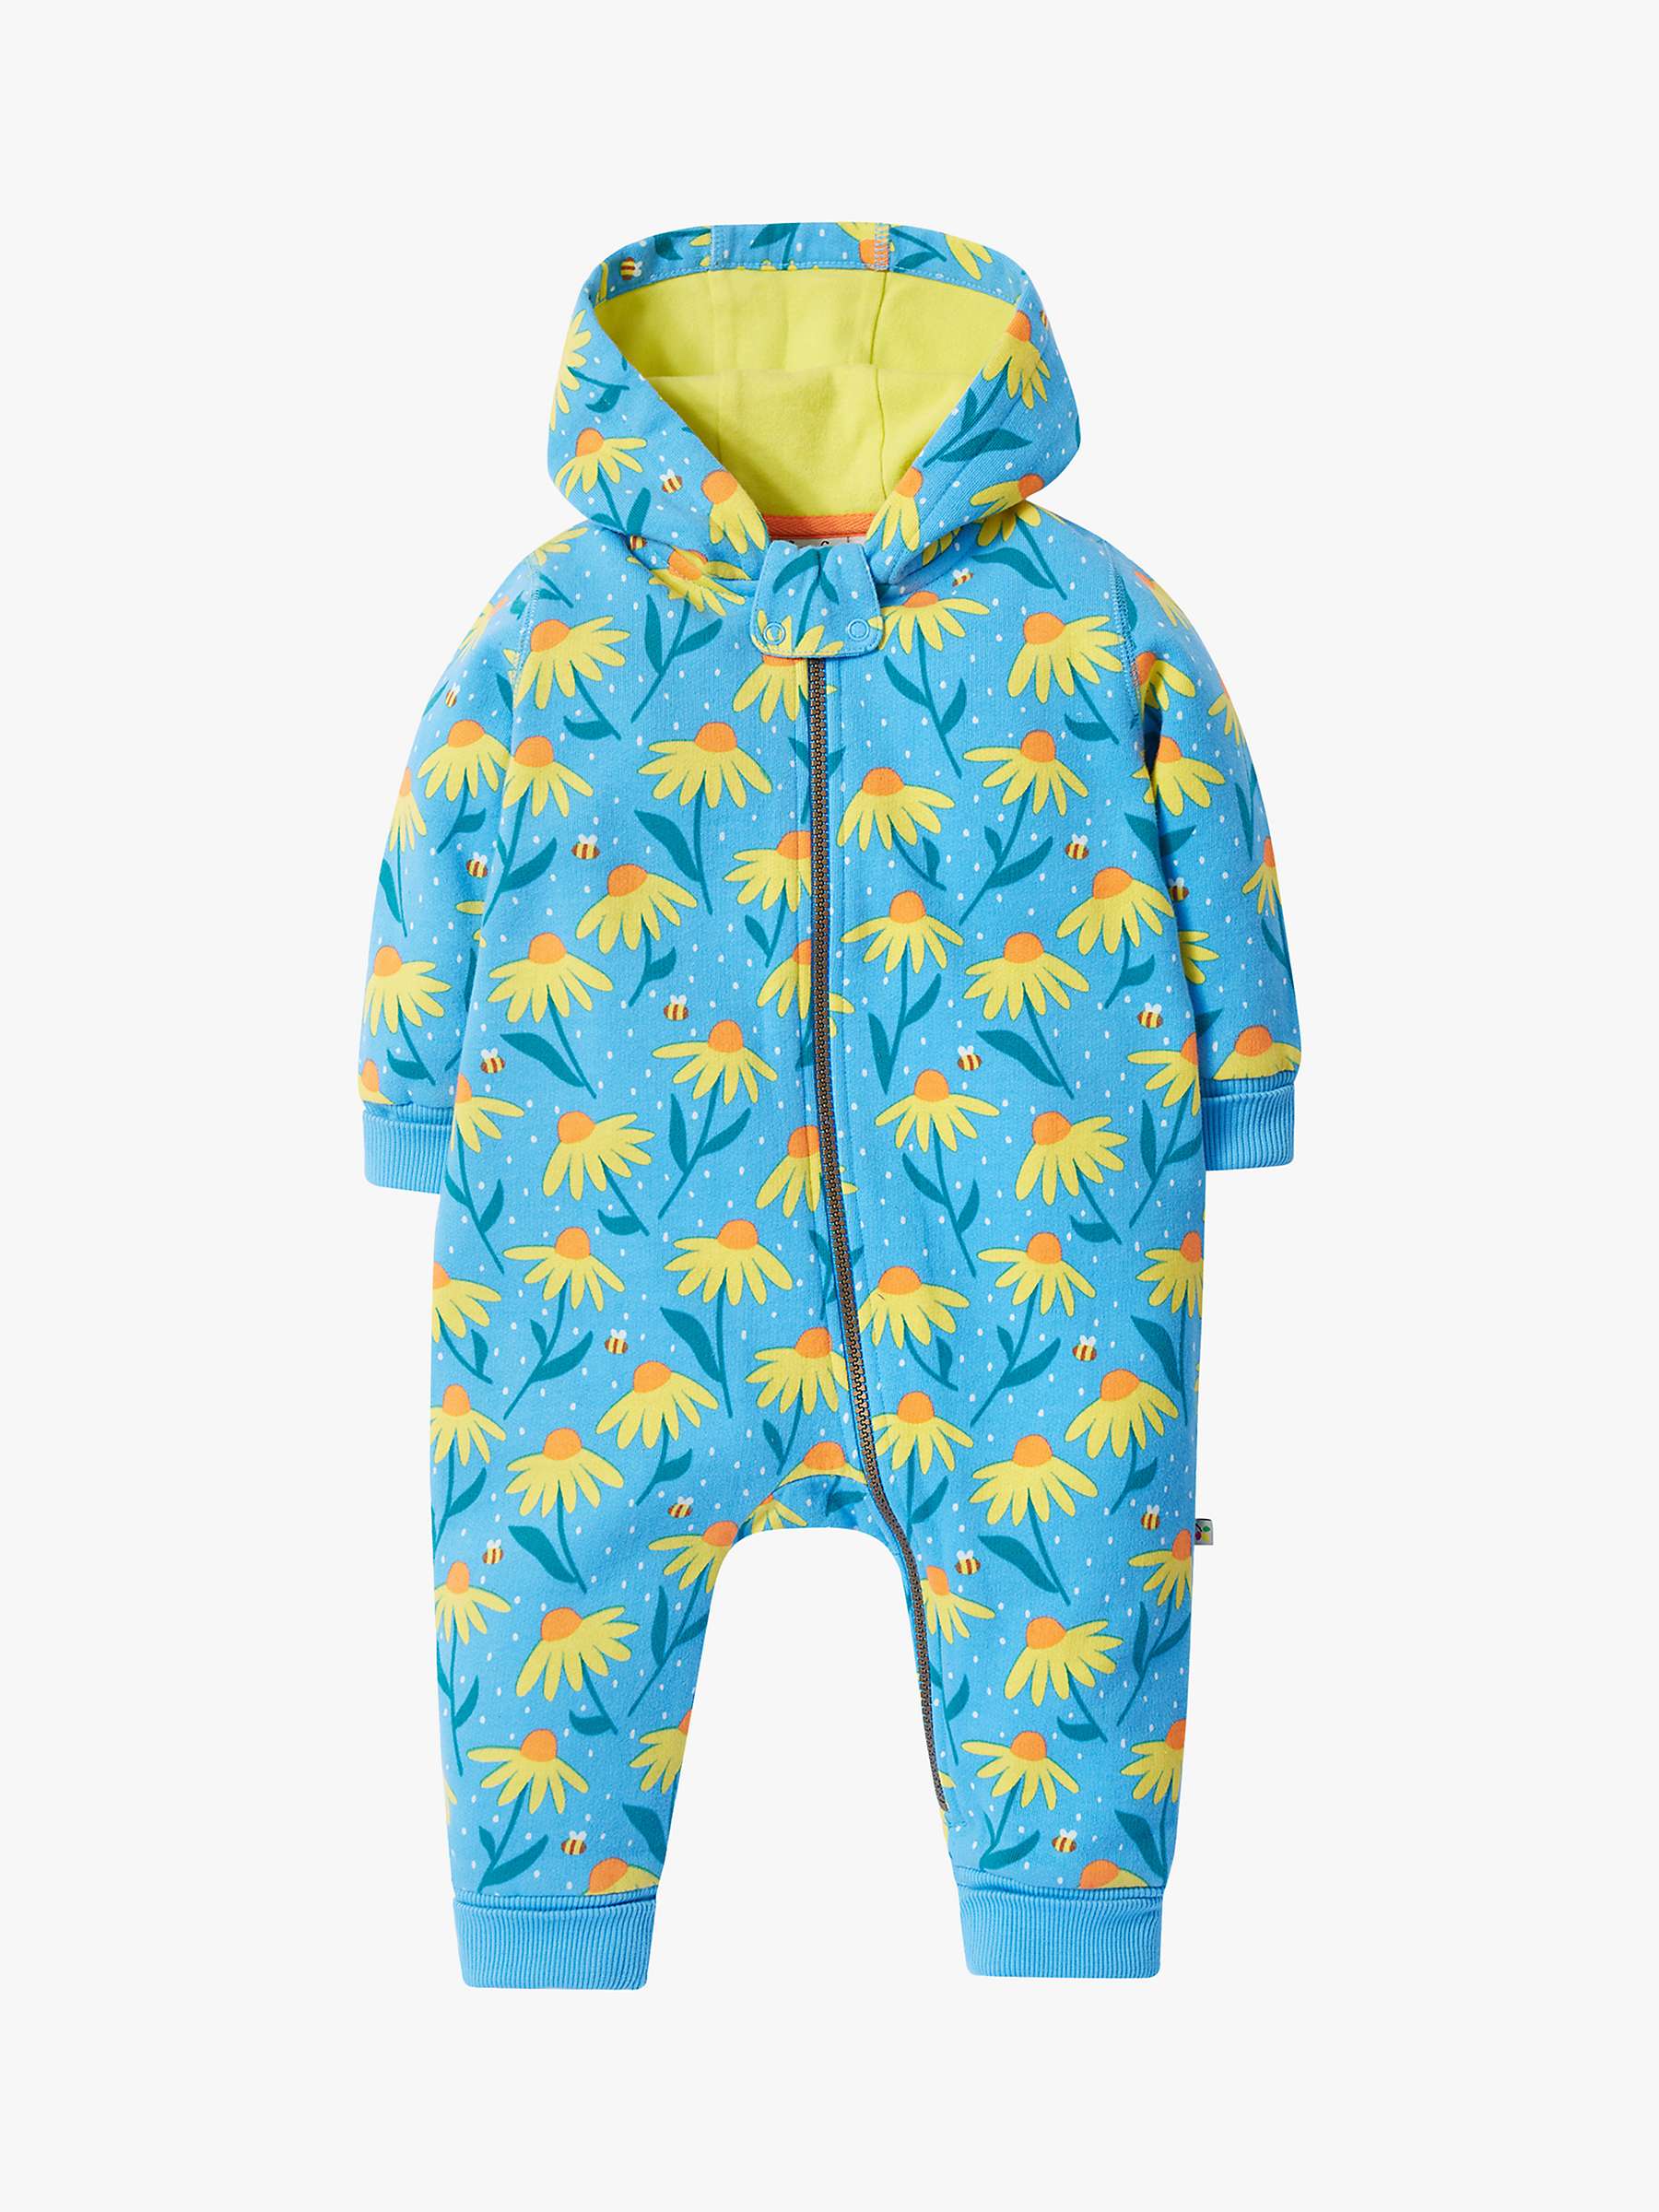 Buy Frugi Baby Organic Cotton Print Hooded Snuggle Suit Online at johnlewis.com